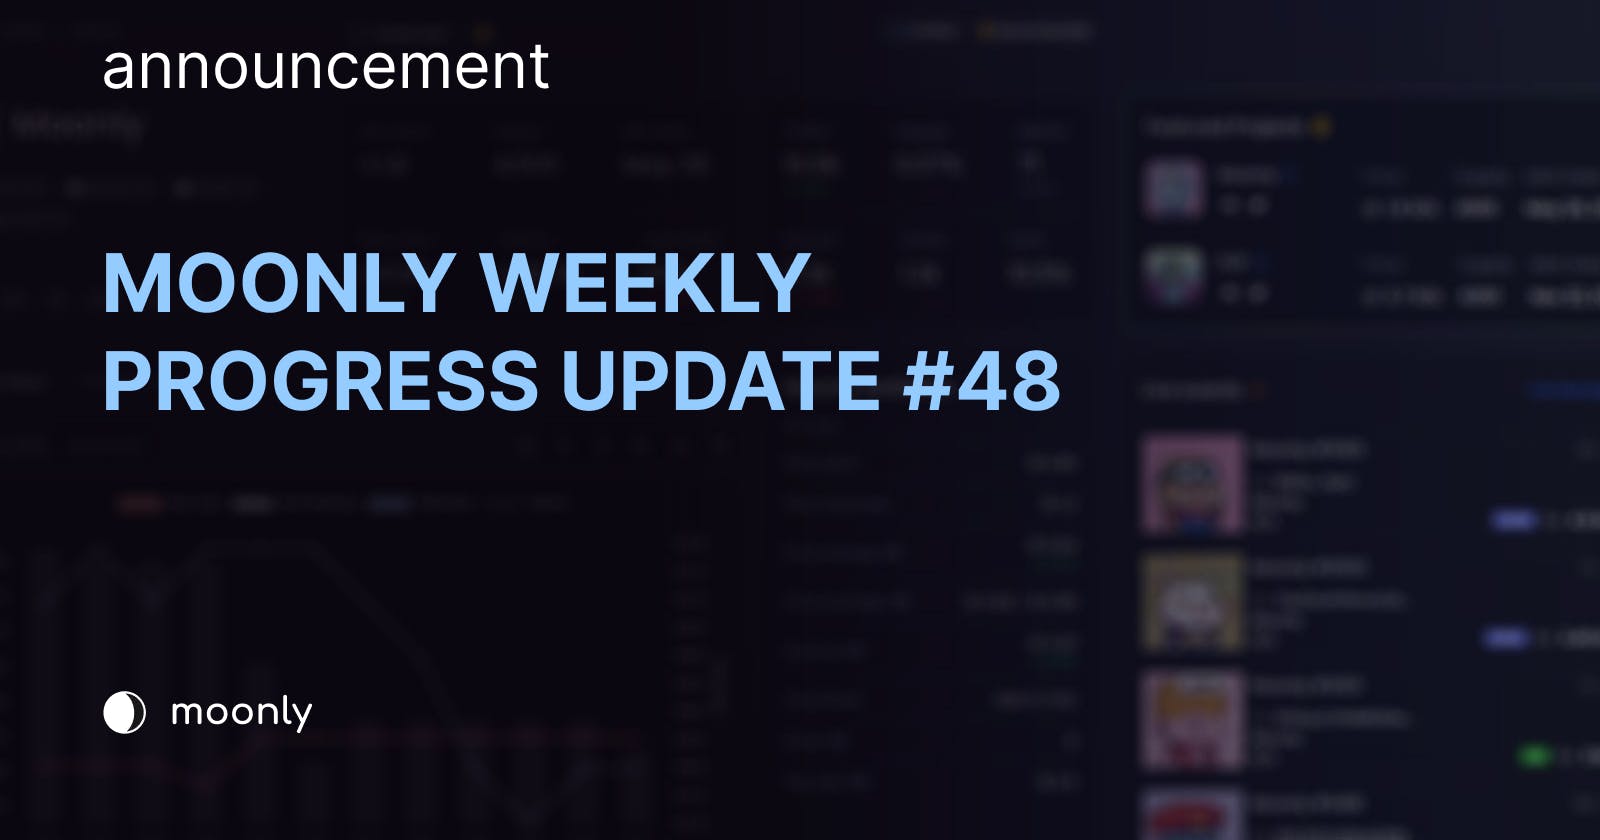 Moonly weekly progress update #48 - Optimizing our Discord Bot